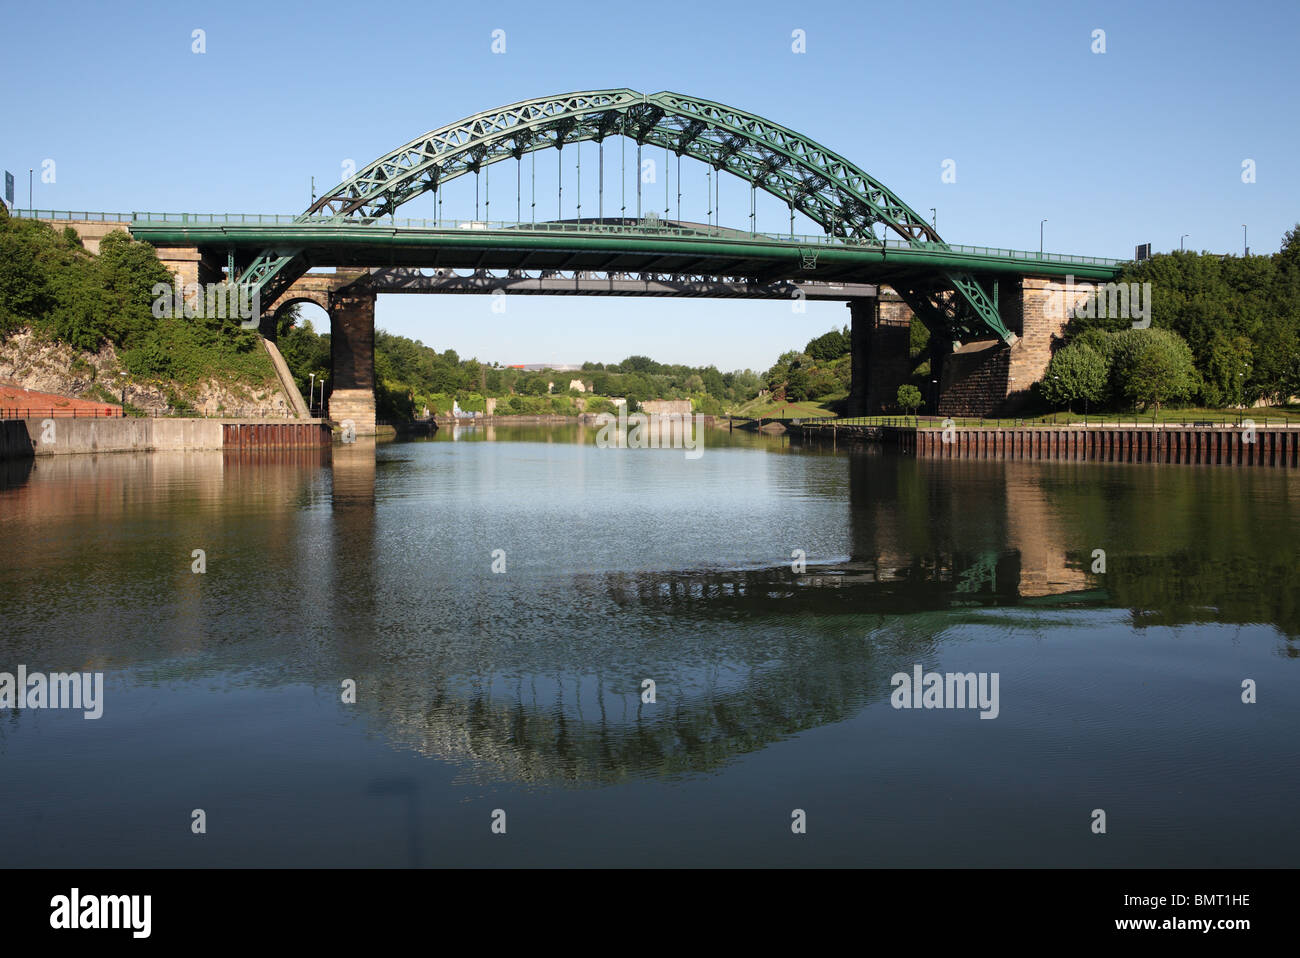 Wearmouth road and railway bridges over the river Wear seen from the east. Sunderland, England. Stock Photo